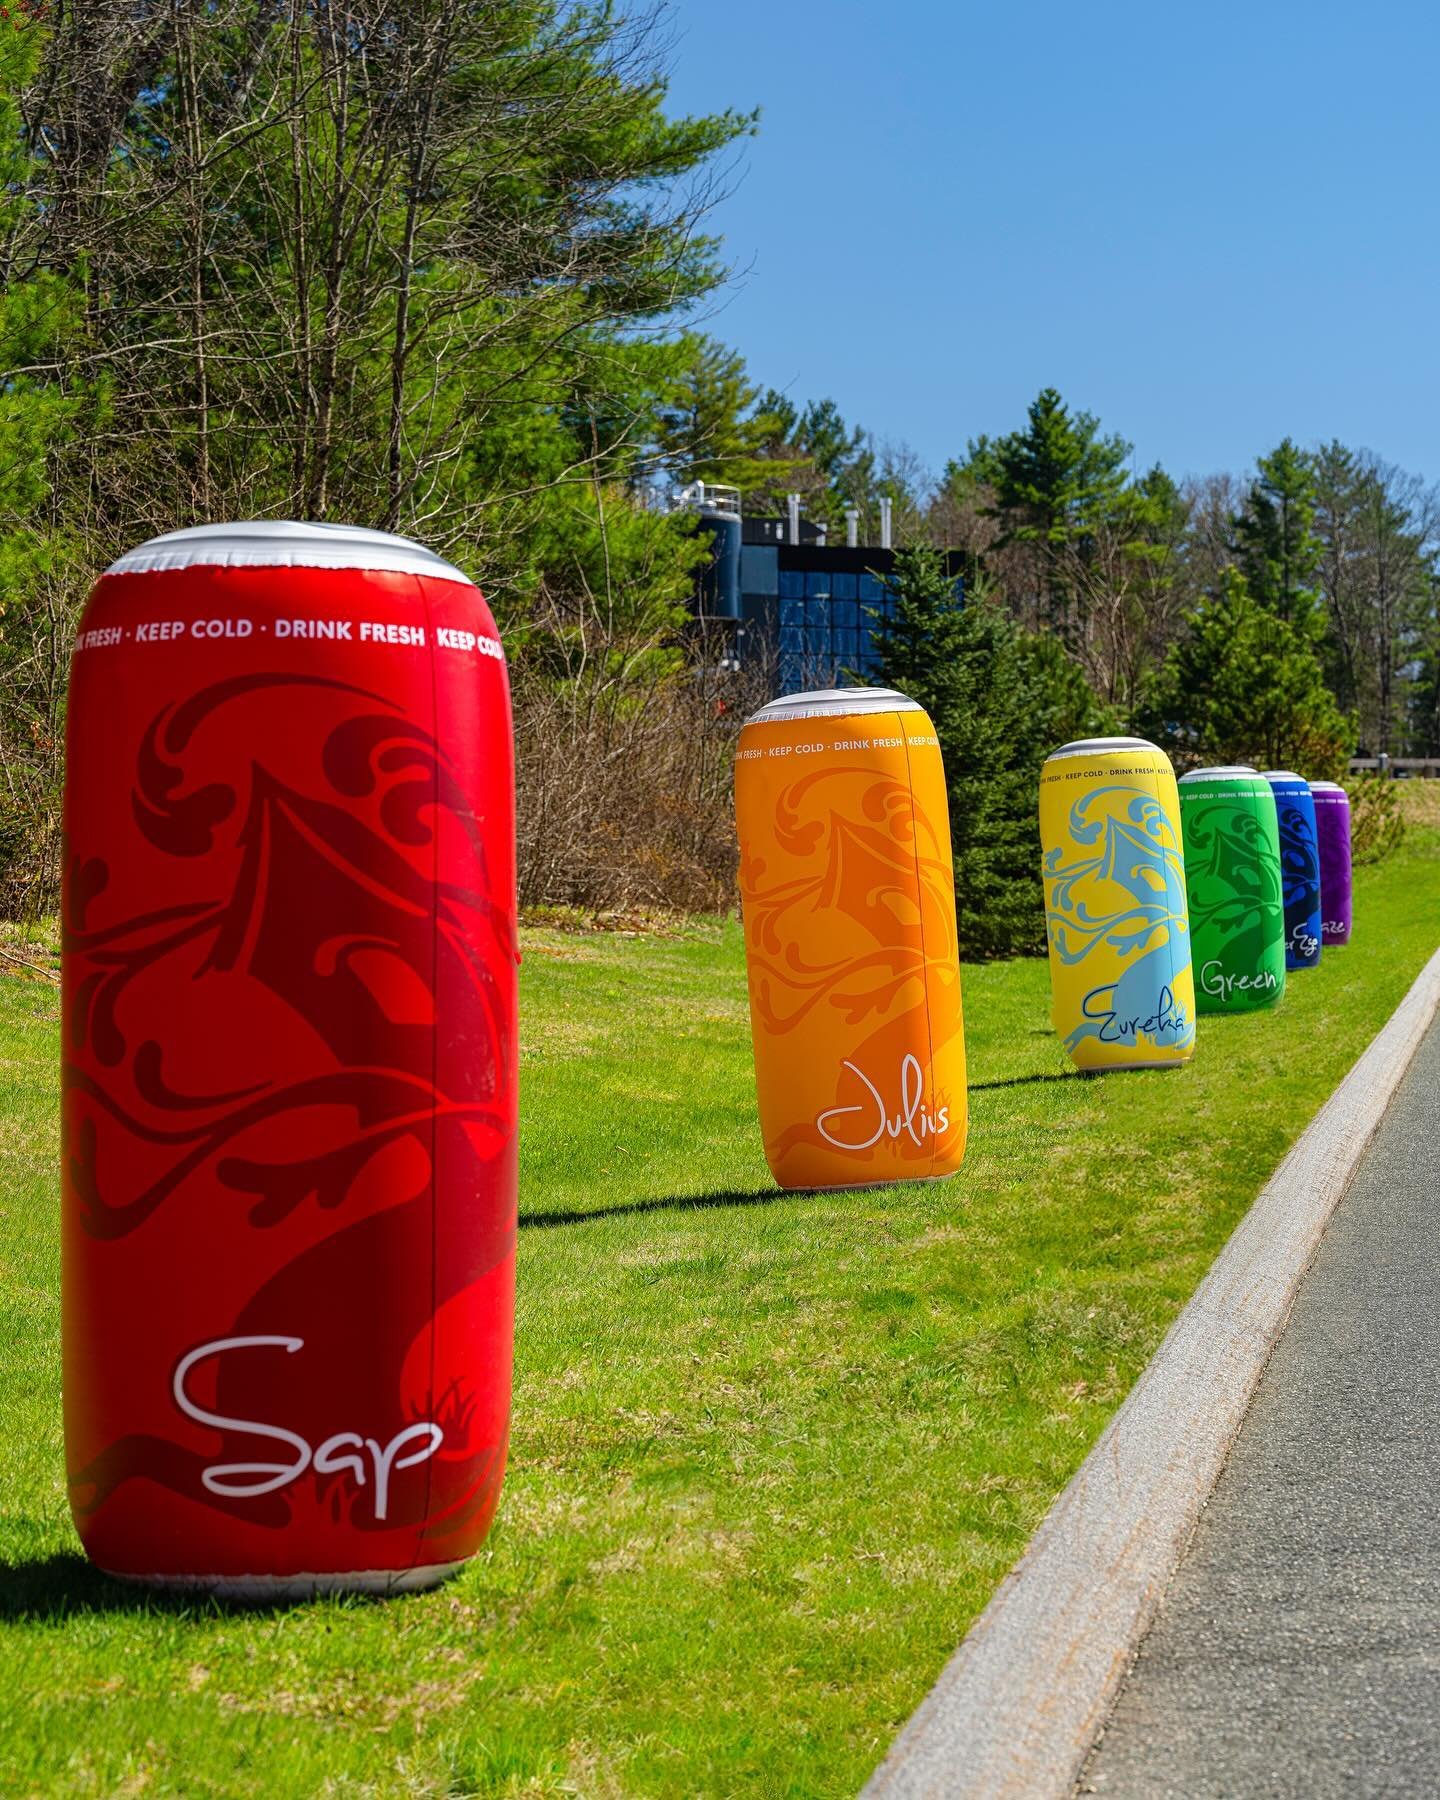 The road to happiness is lined with your favorite Tree House beers!

&hearts;️🧡💜💙💚

It&rsquo;s looking like the best Saturday of the year today - we can&rsquo;t wait to celebrate it with you!